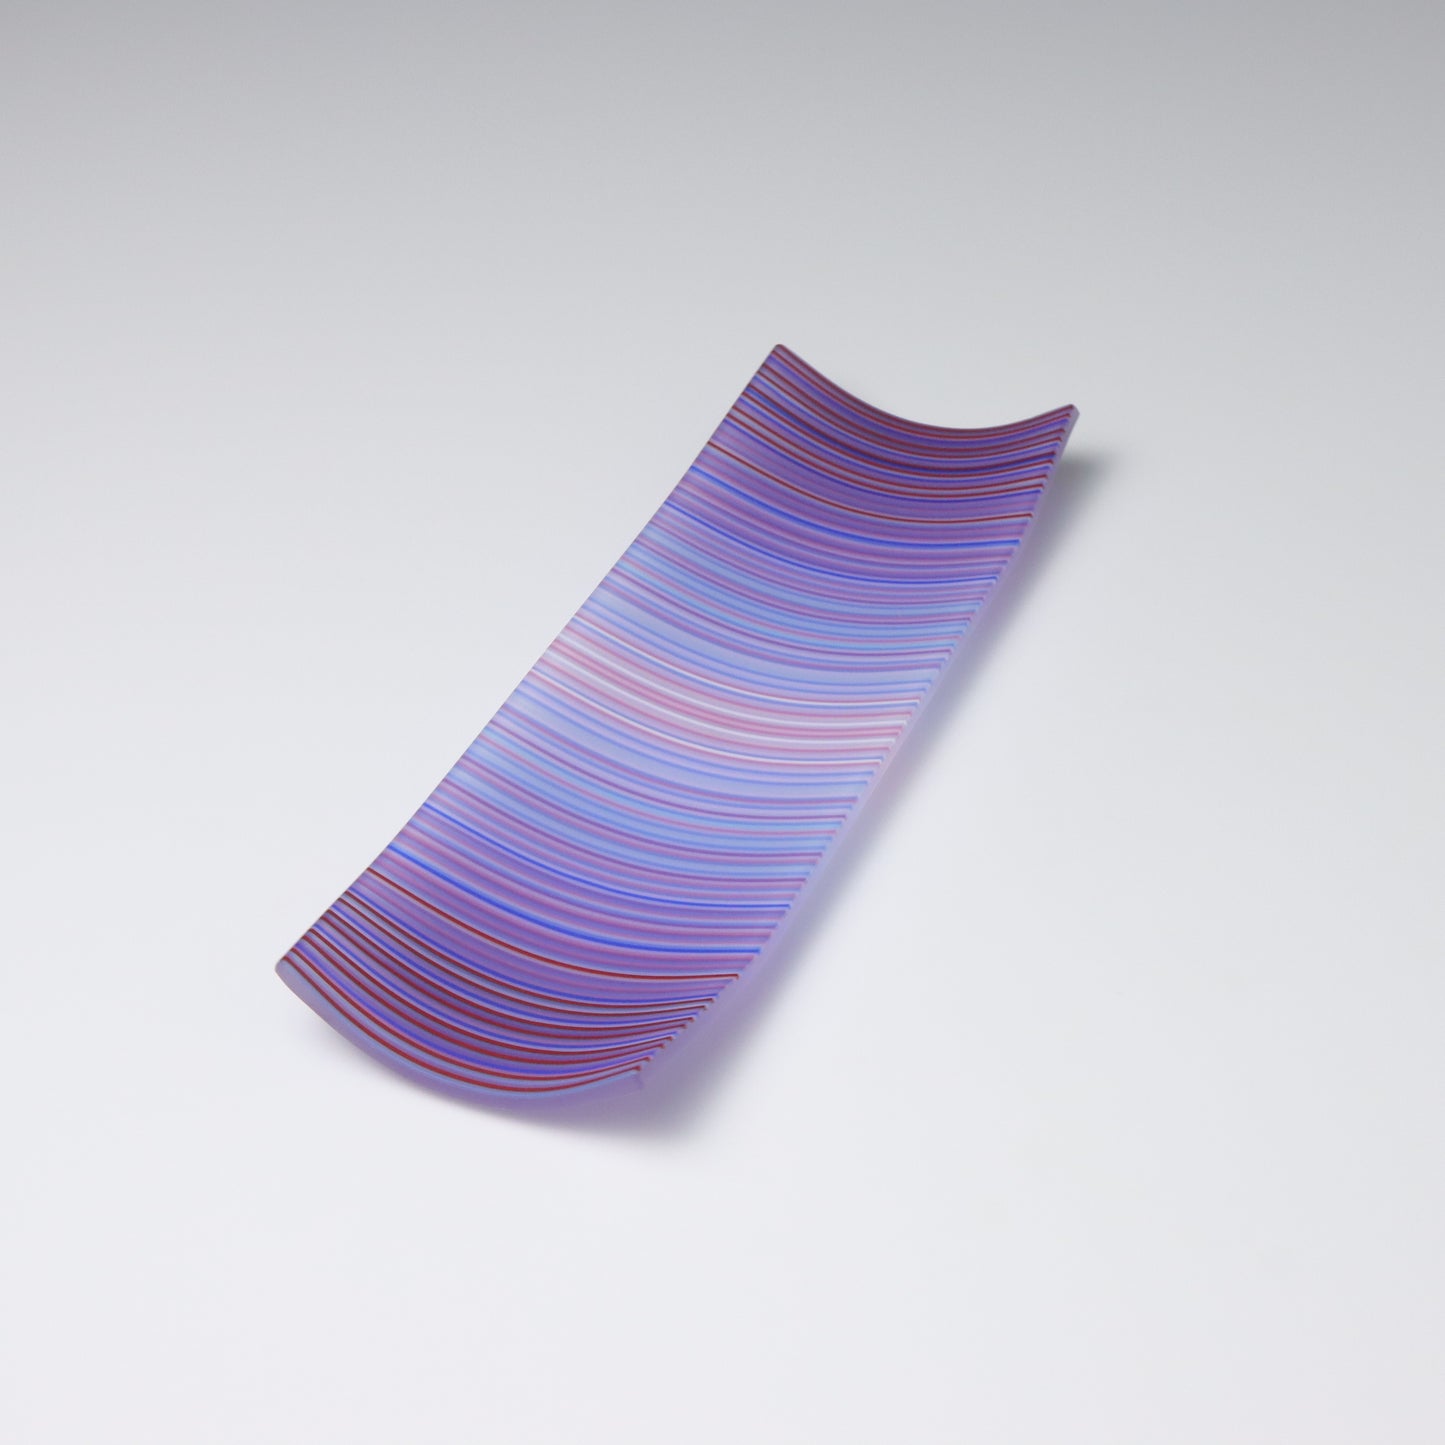 S2307 | Rectangular Shaped ColourWave Glass Plate | Pale and Dark Purples